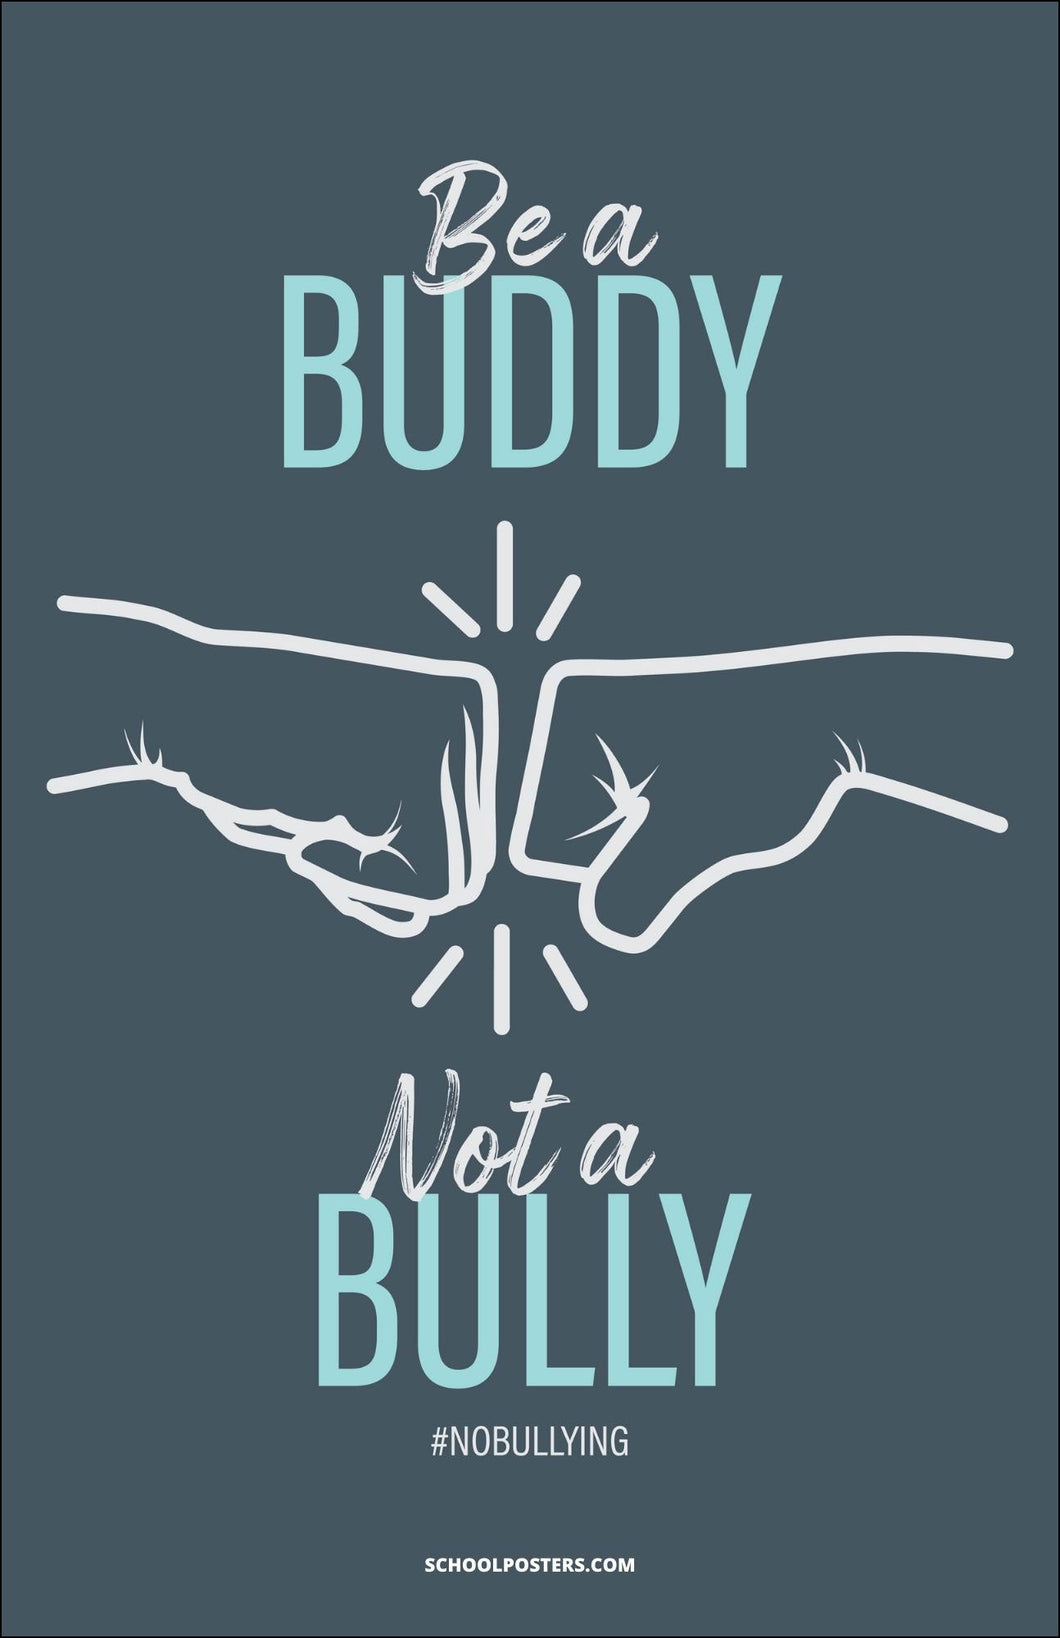 Be A Buddy, Not A Bully Poster